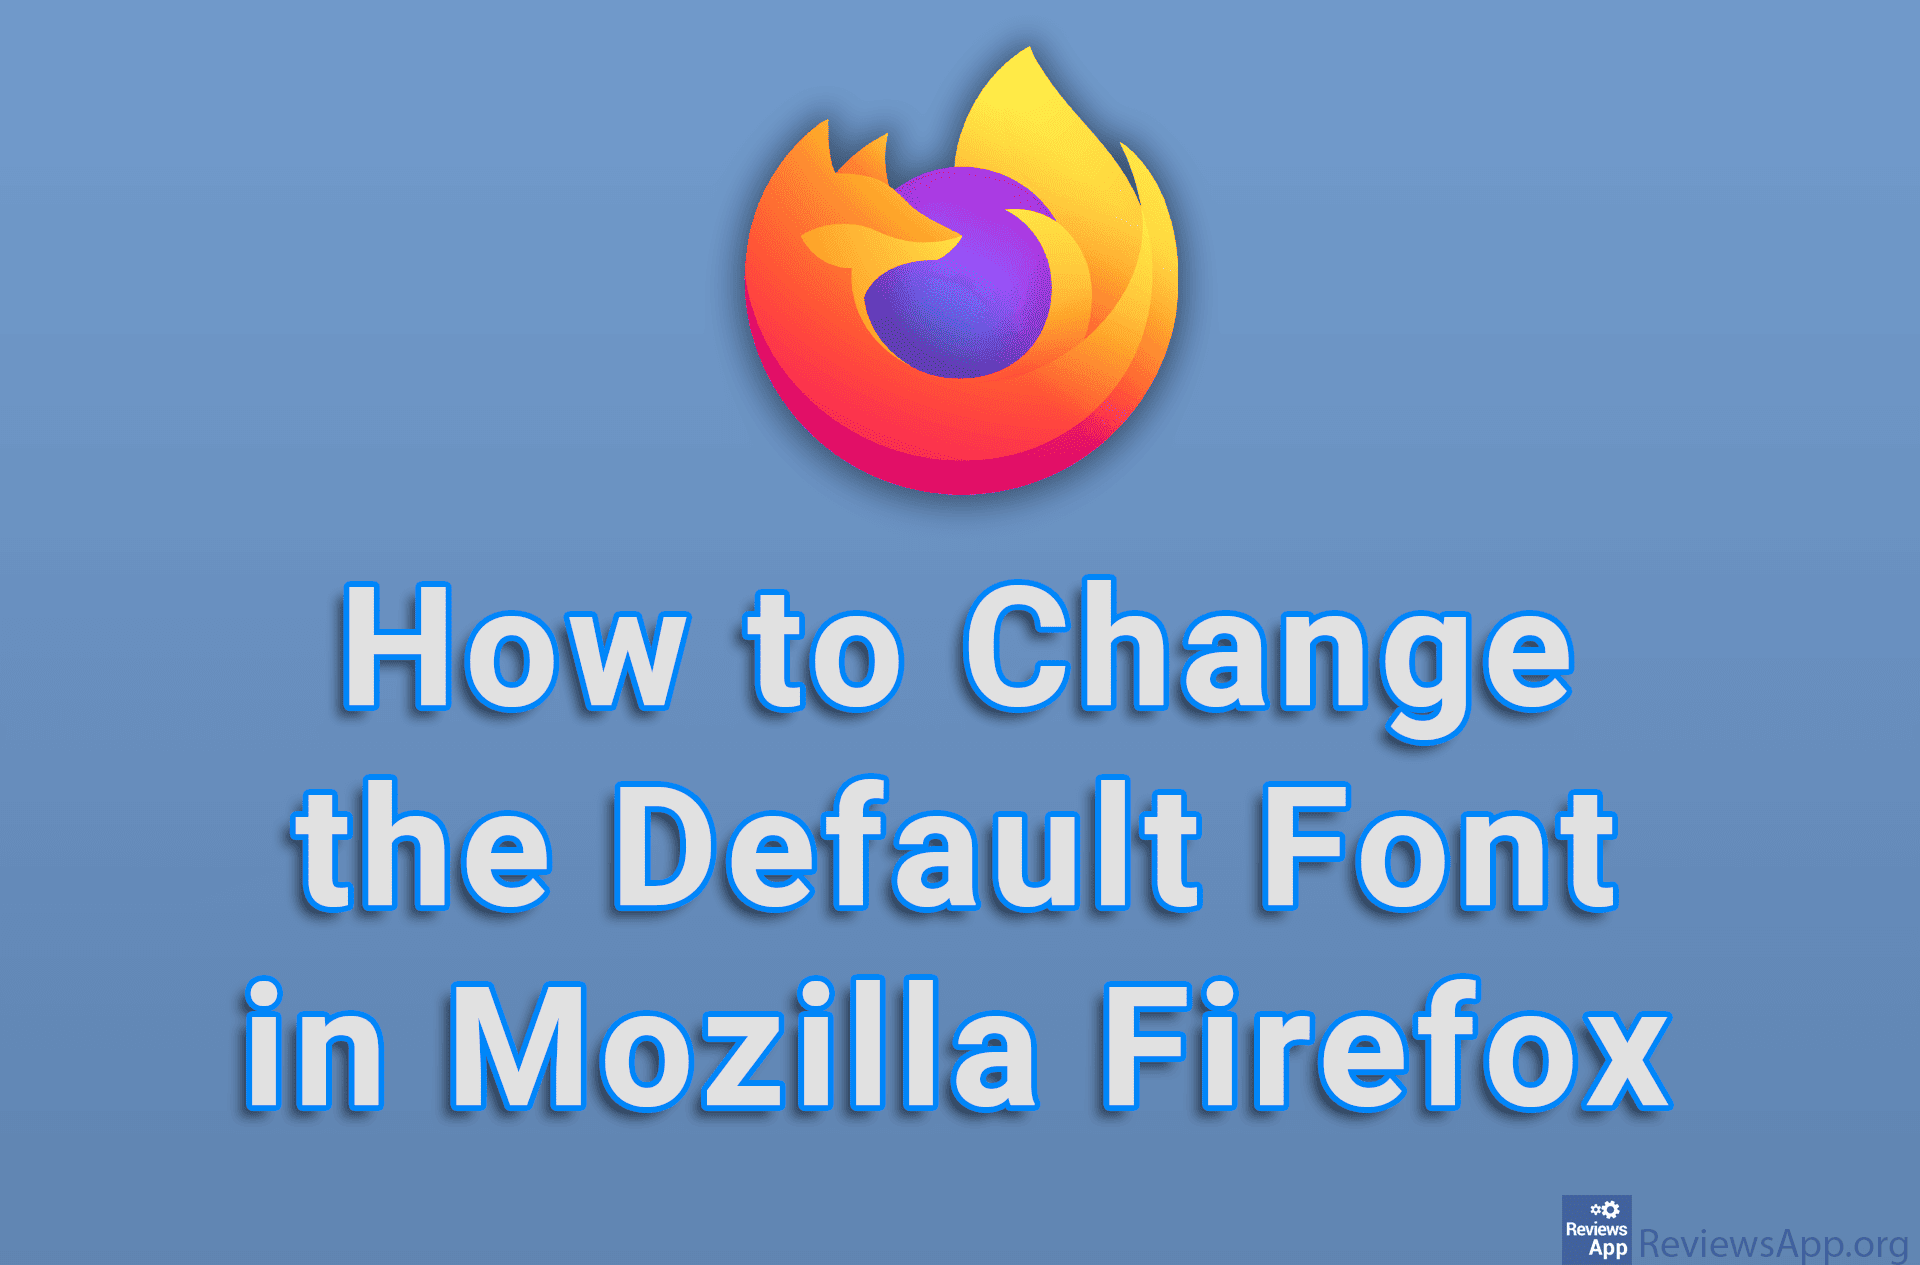 How to Change the Default Font in Mozilla Firefox